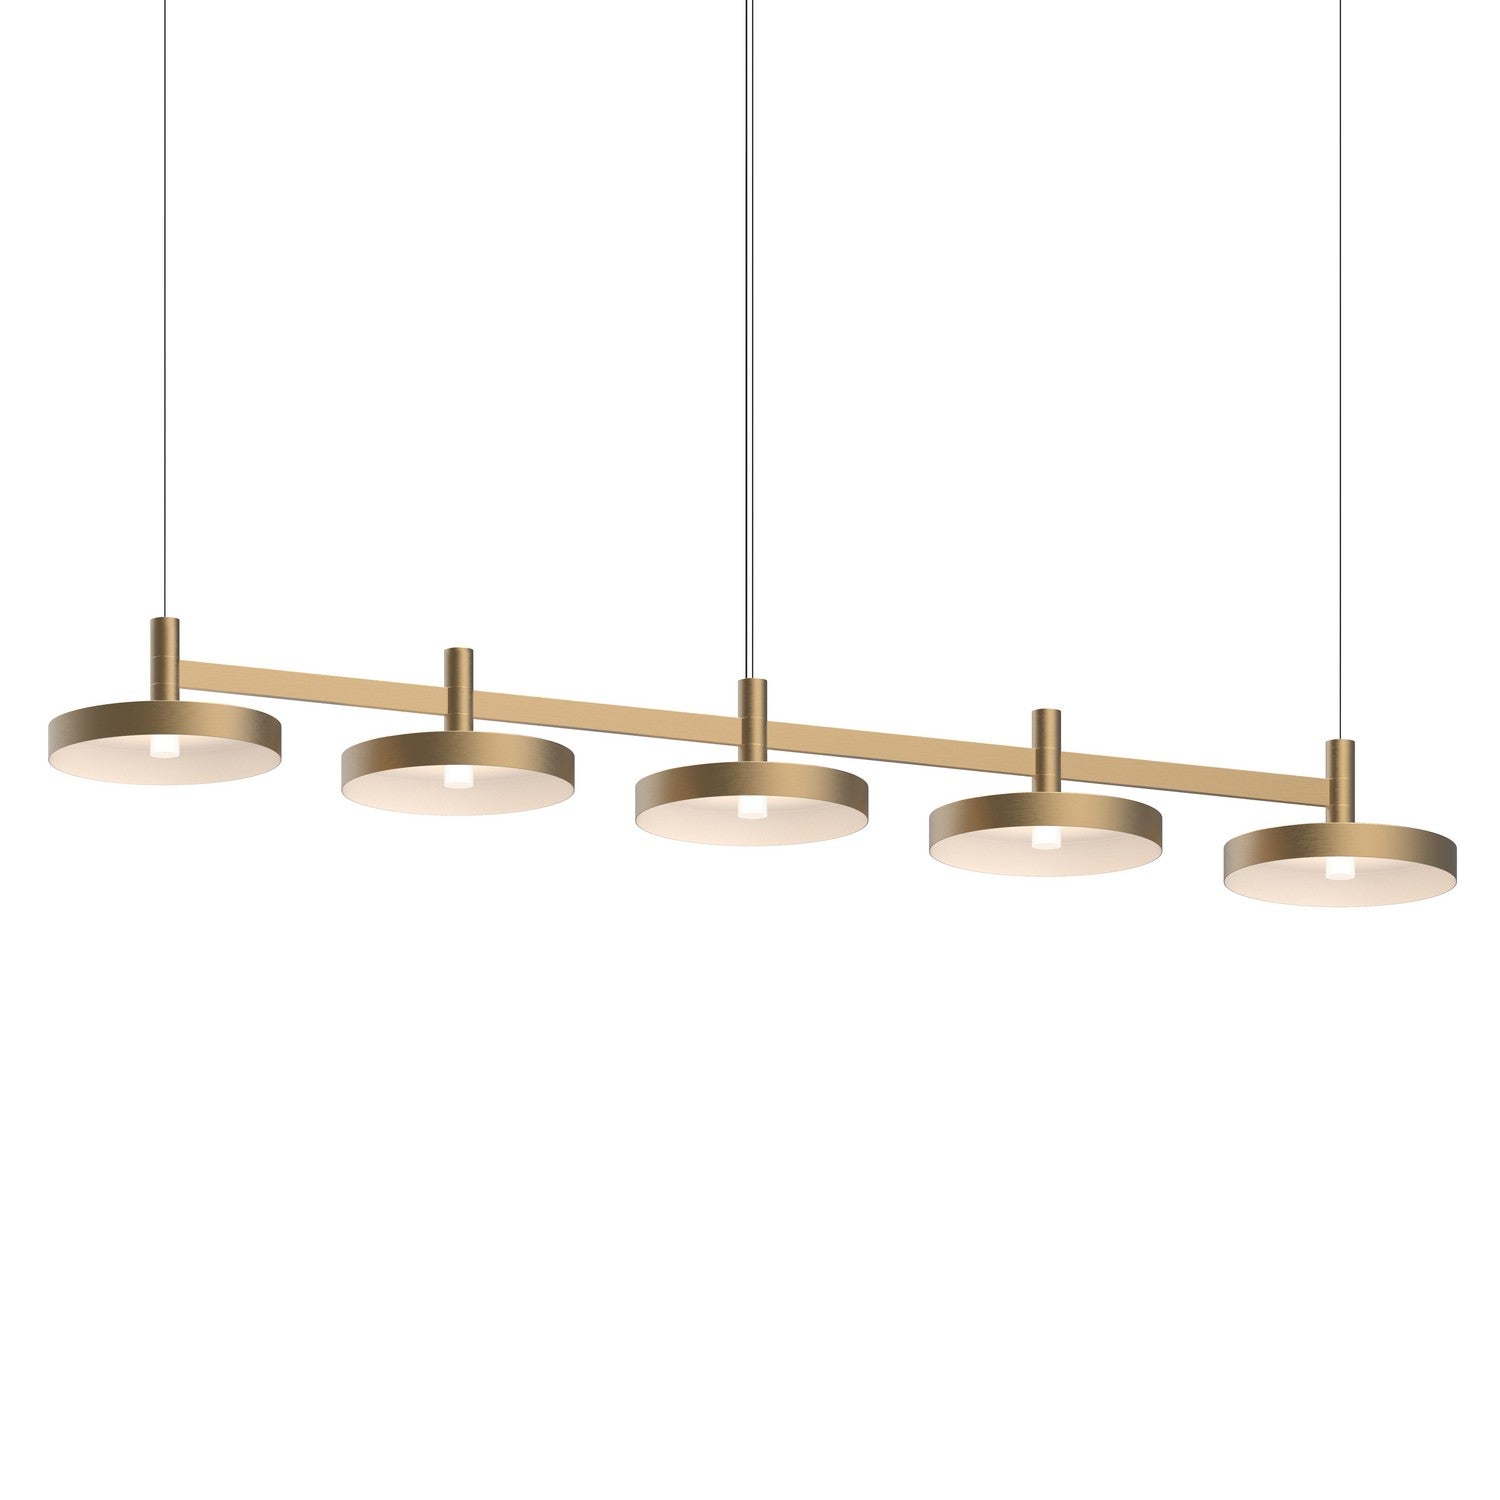 Sonneman - 1785.14-PAN - LED Linear Pendant - Systema Staccato - Brass Finish